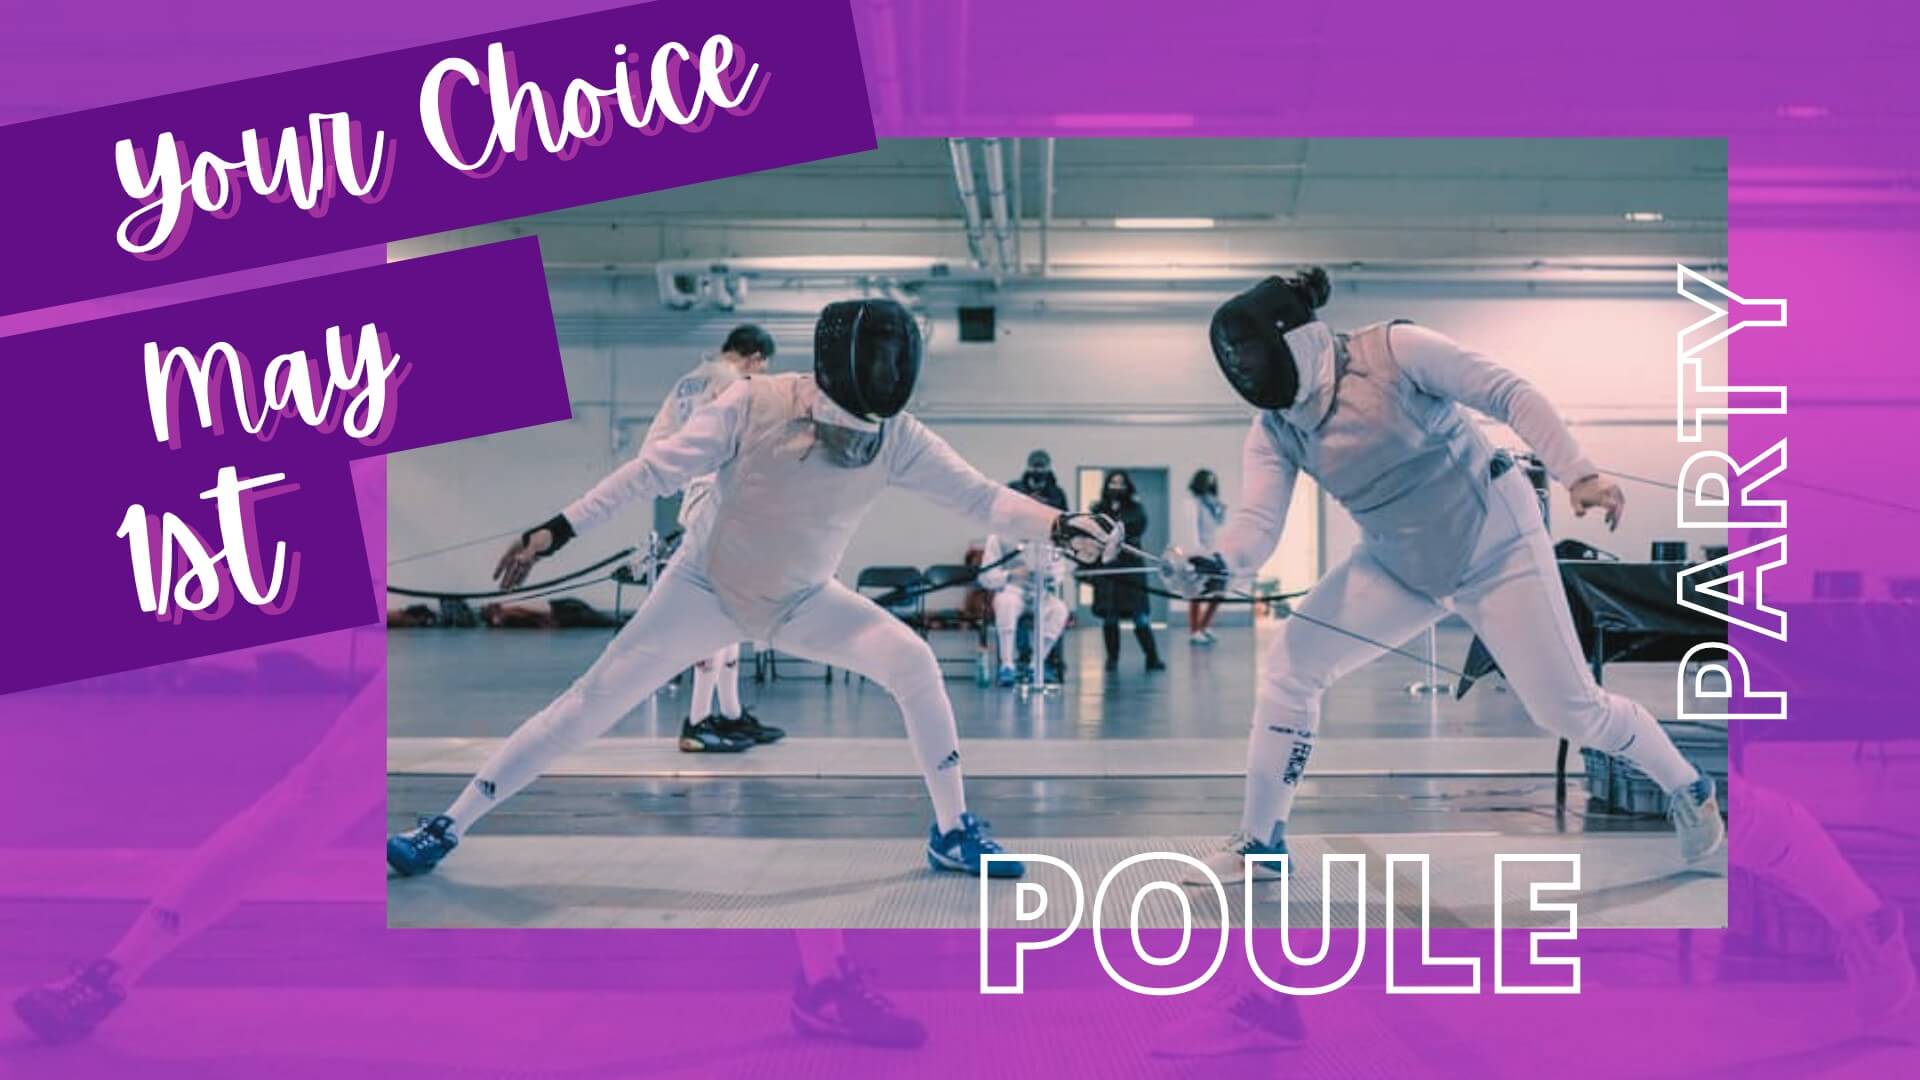 Your Choice May 1: Poule Party